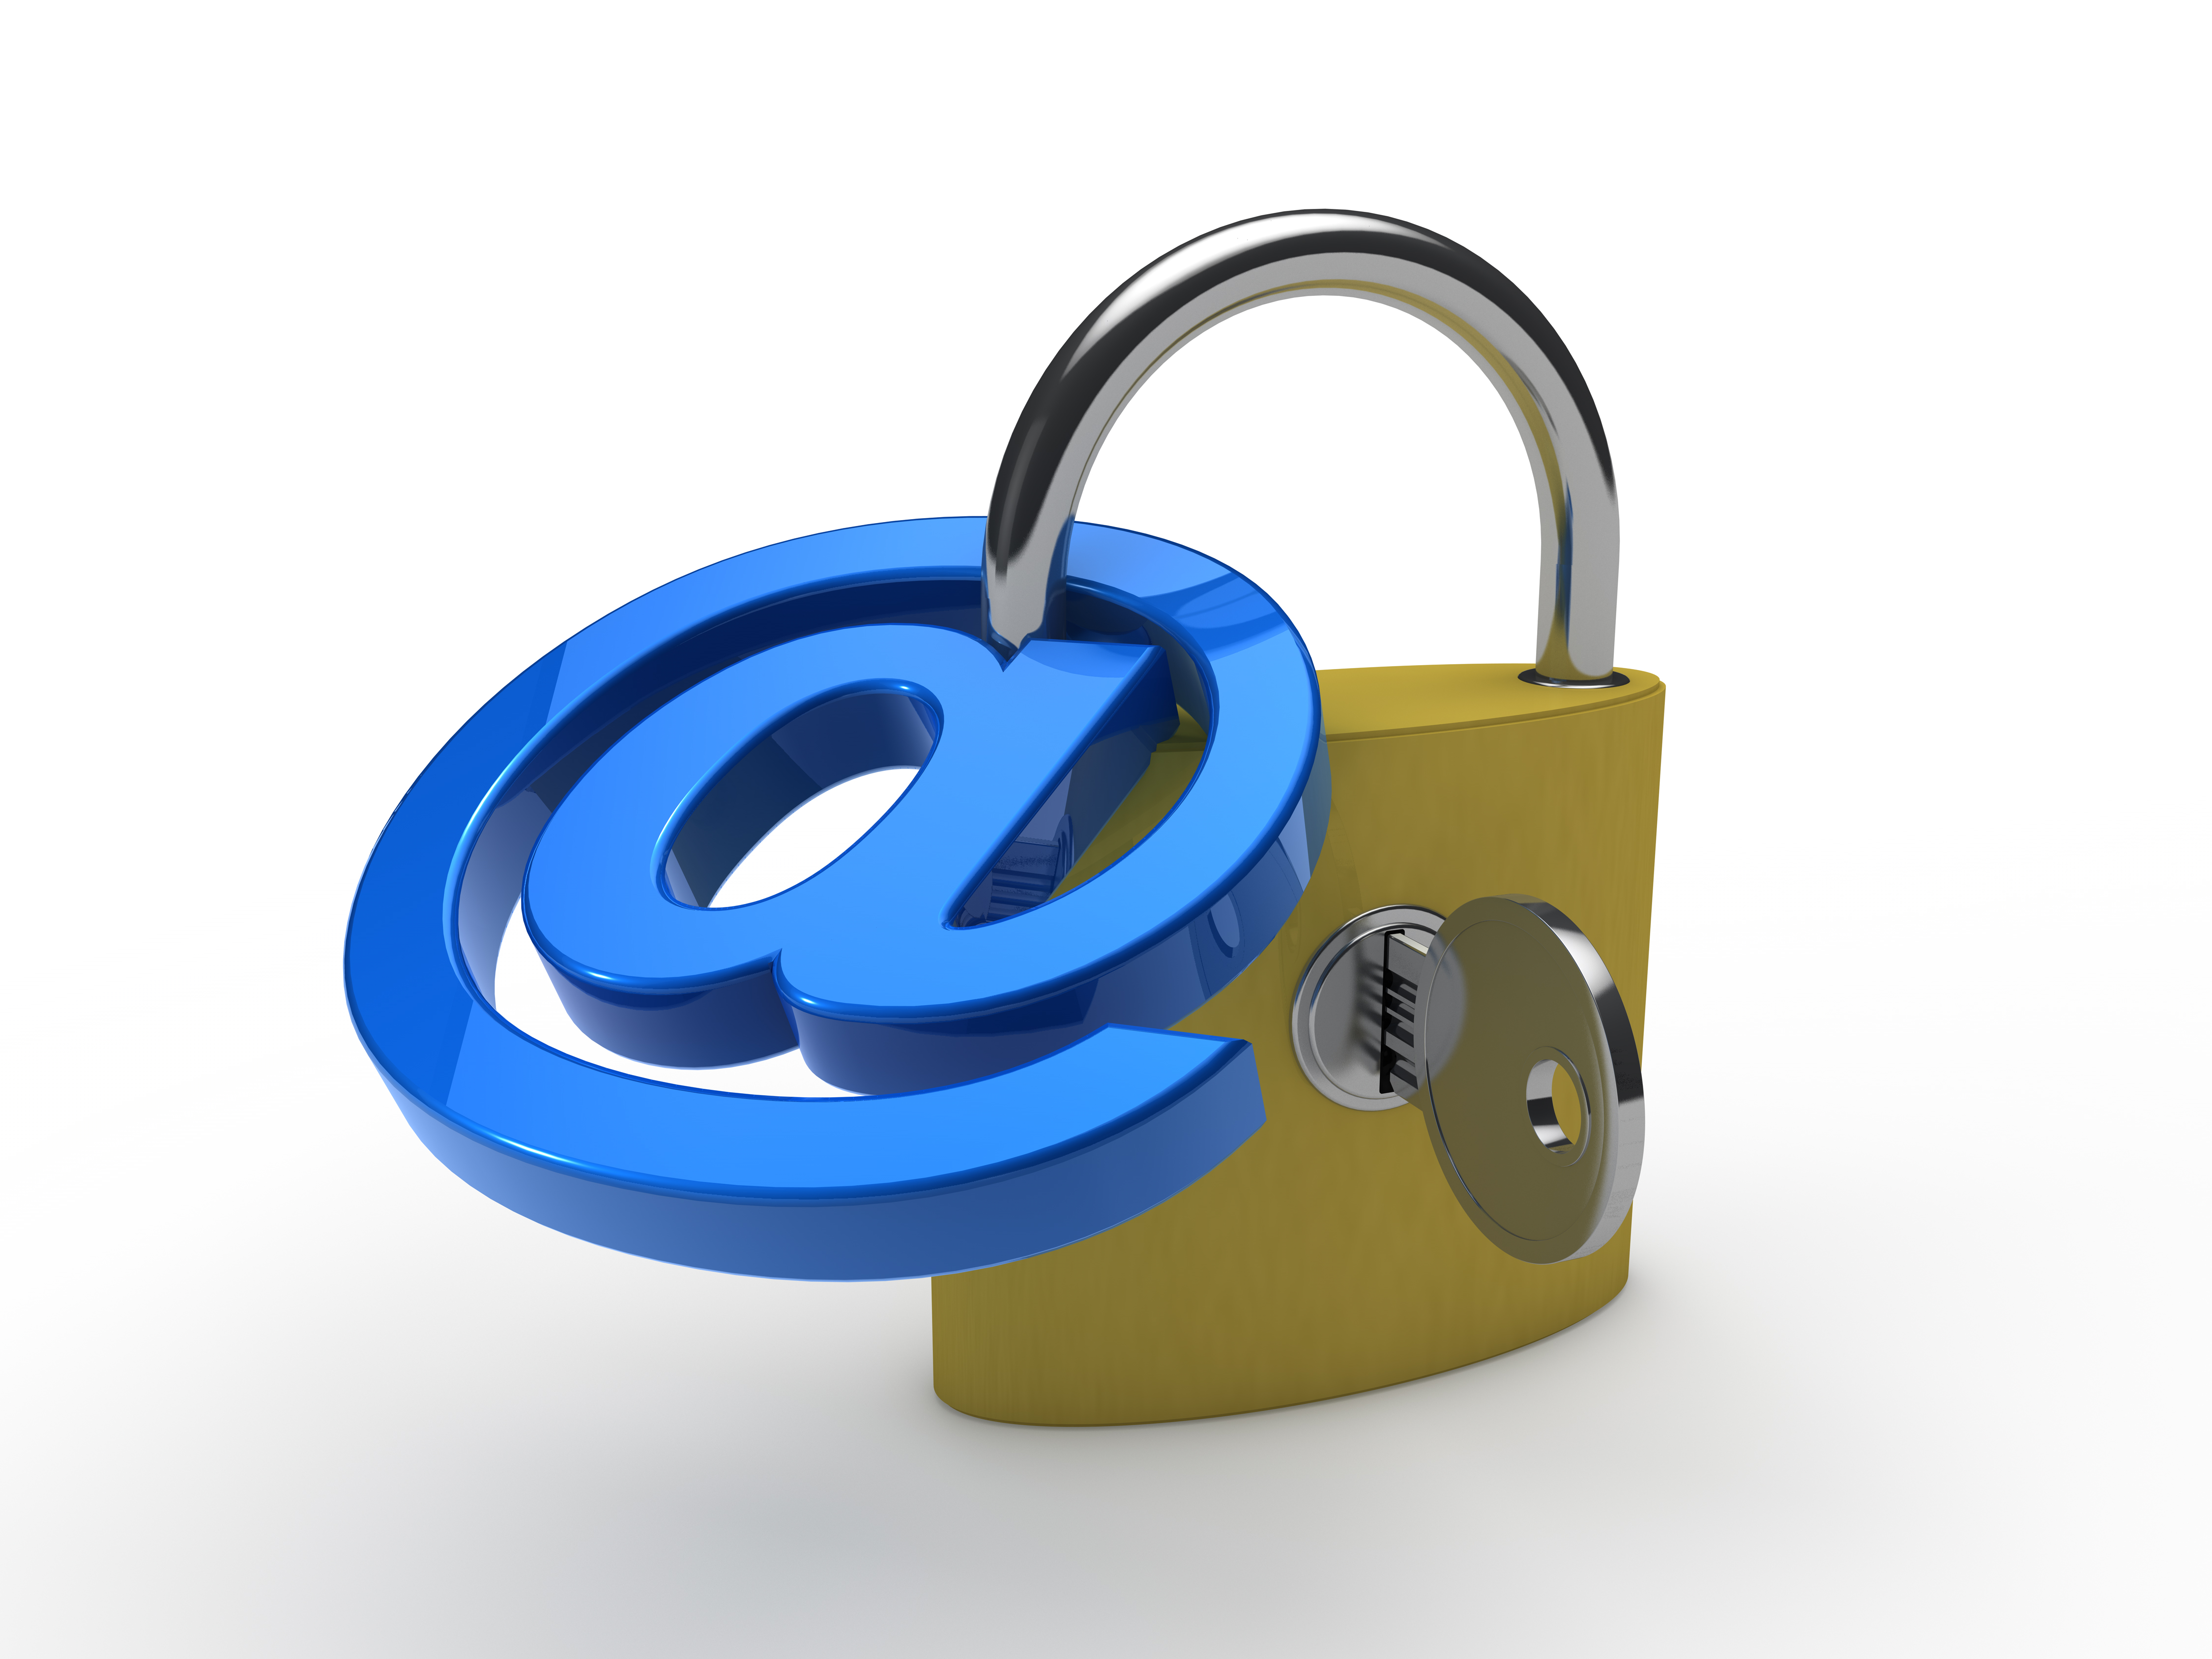 Golden lock with the silver keyhole and key with the blue @ sign locked - Email Security